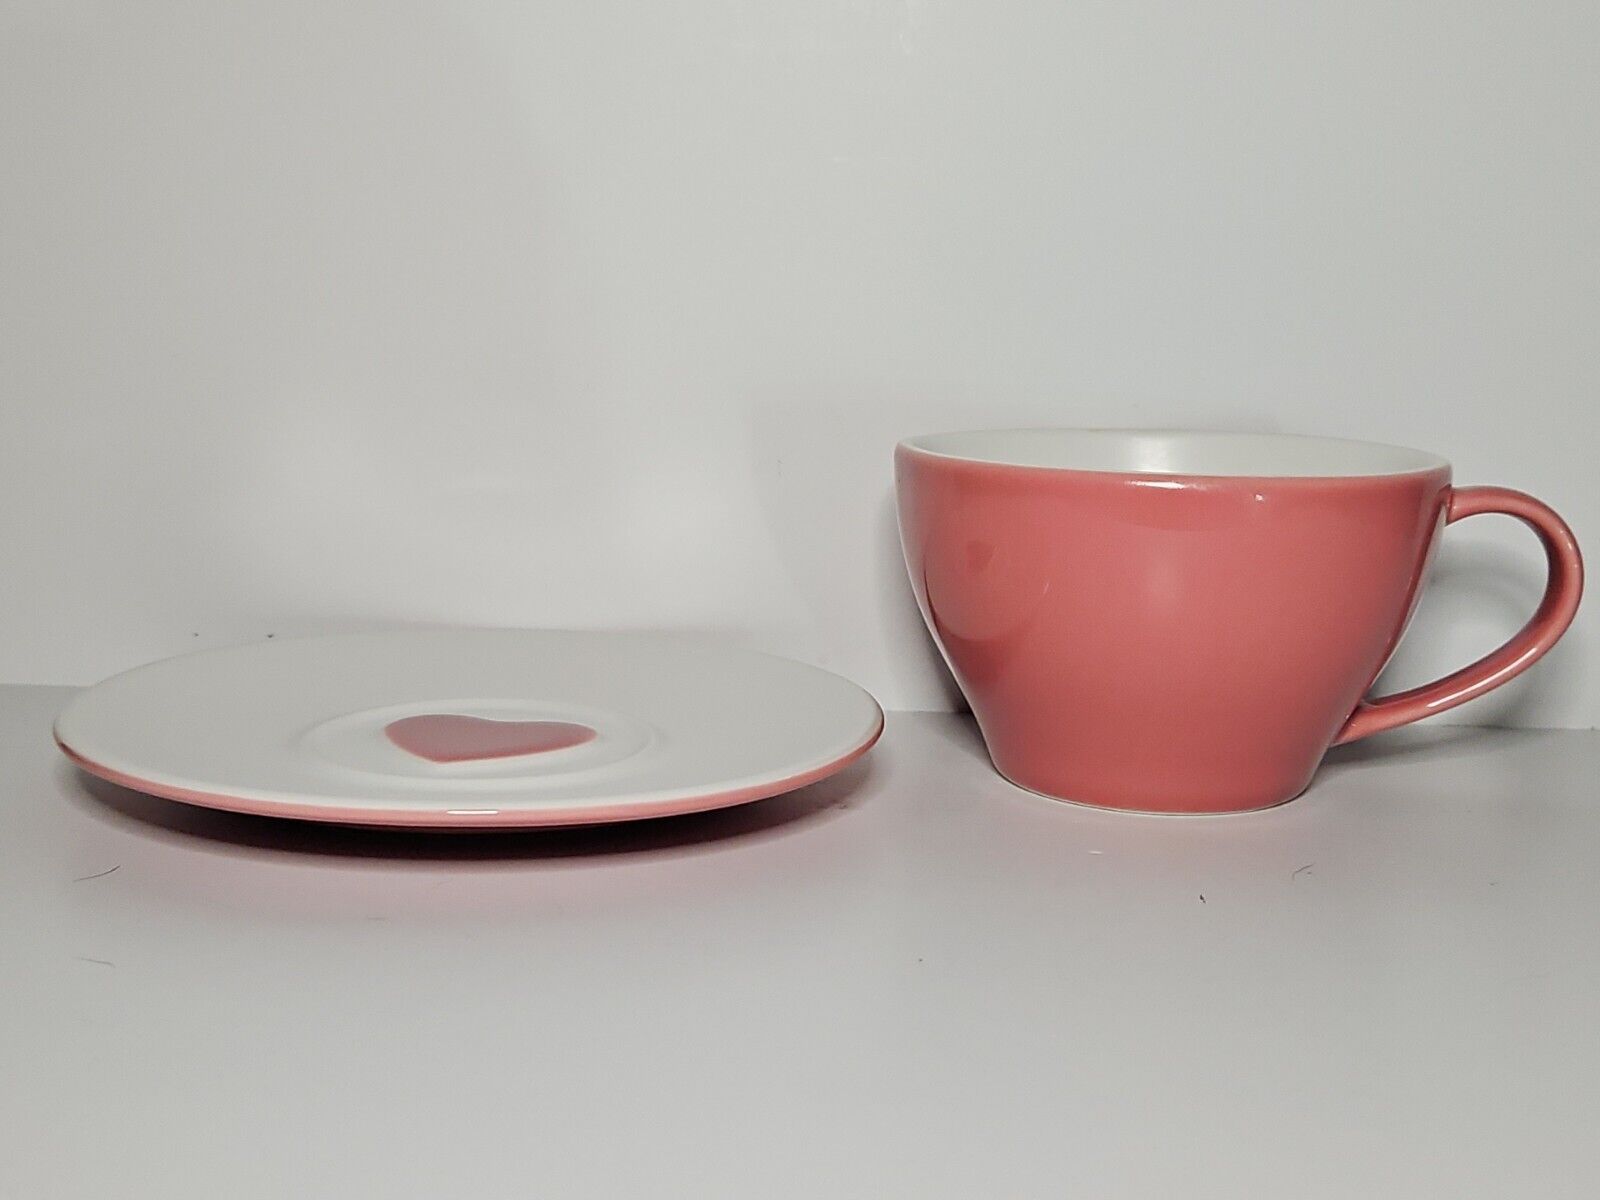 Starbucks Pink Heart Coffee Cup & Saucer From 2005.